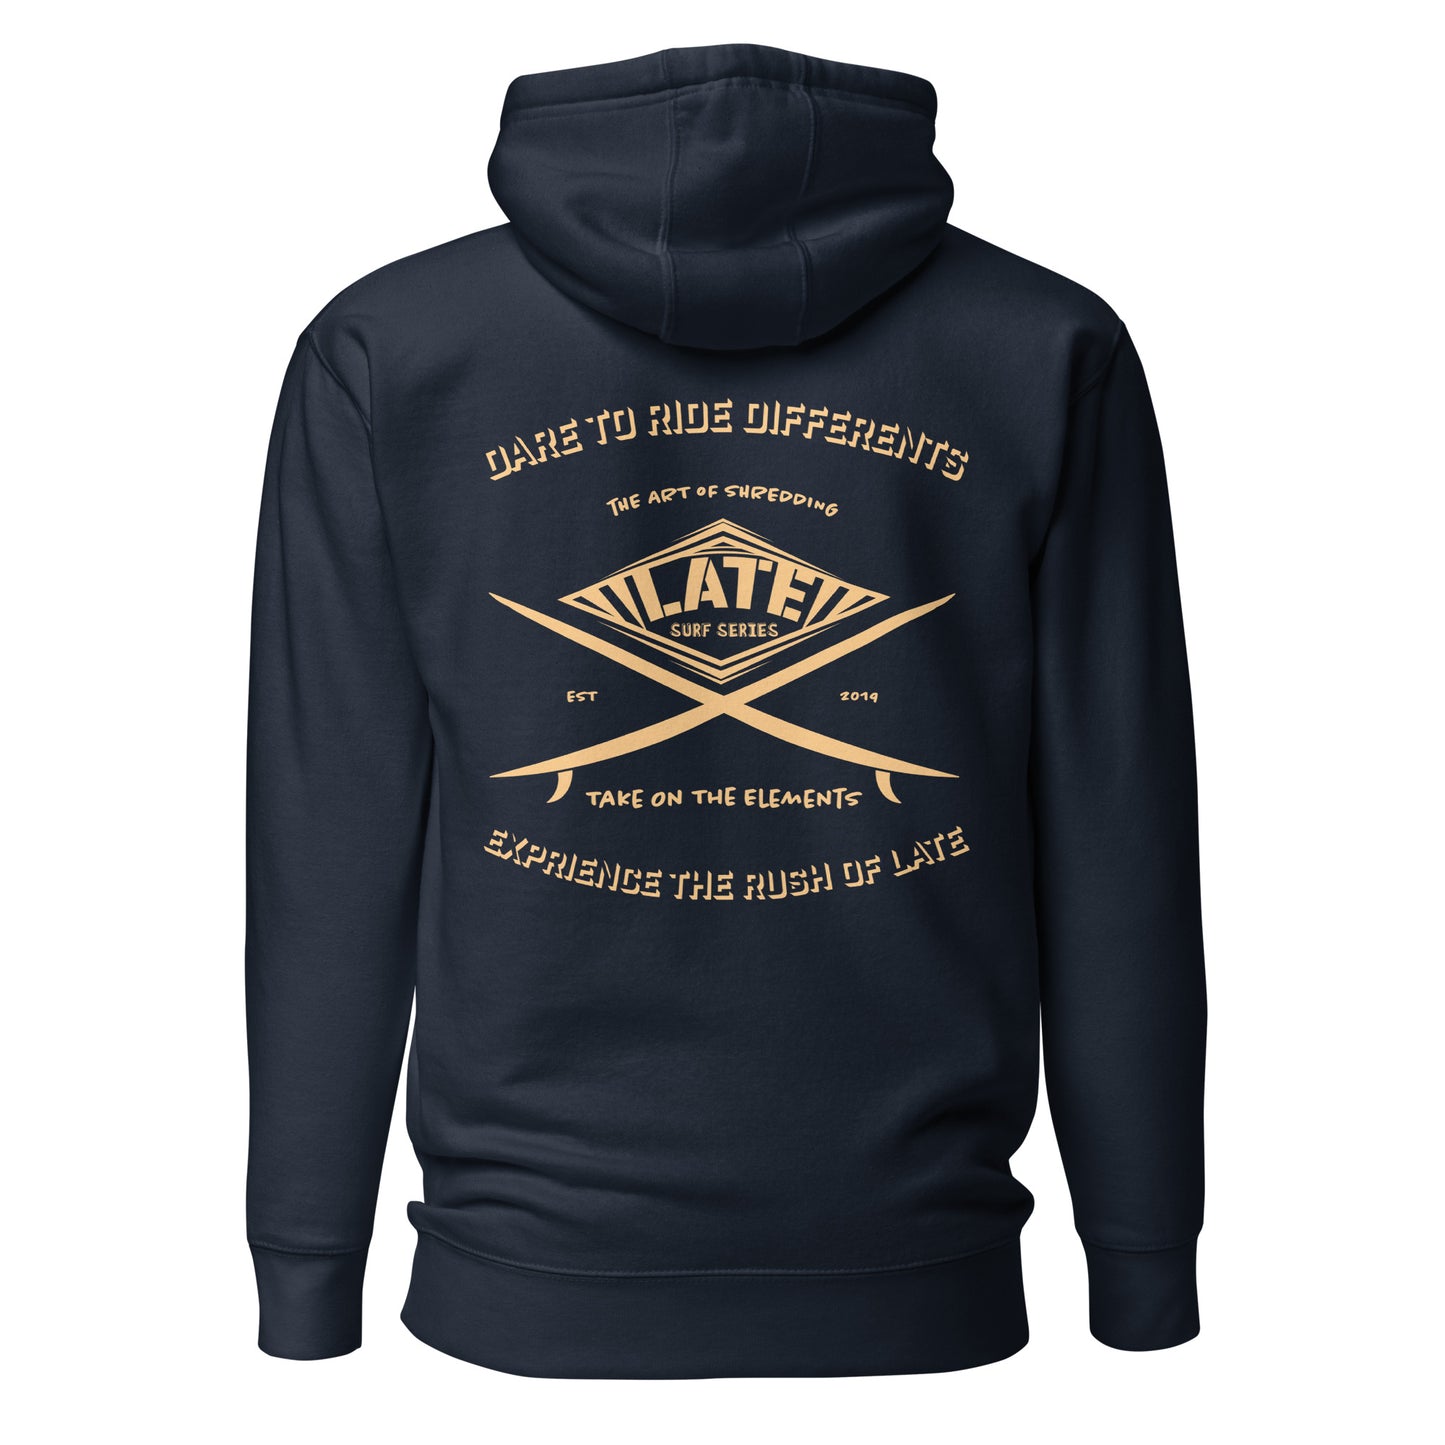 Hoodie surf navy dare to ride differents / the art of shredding / take on the elements / Logo Late surf series